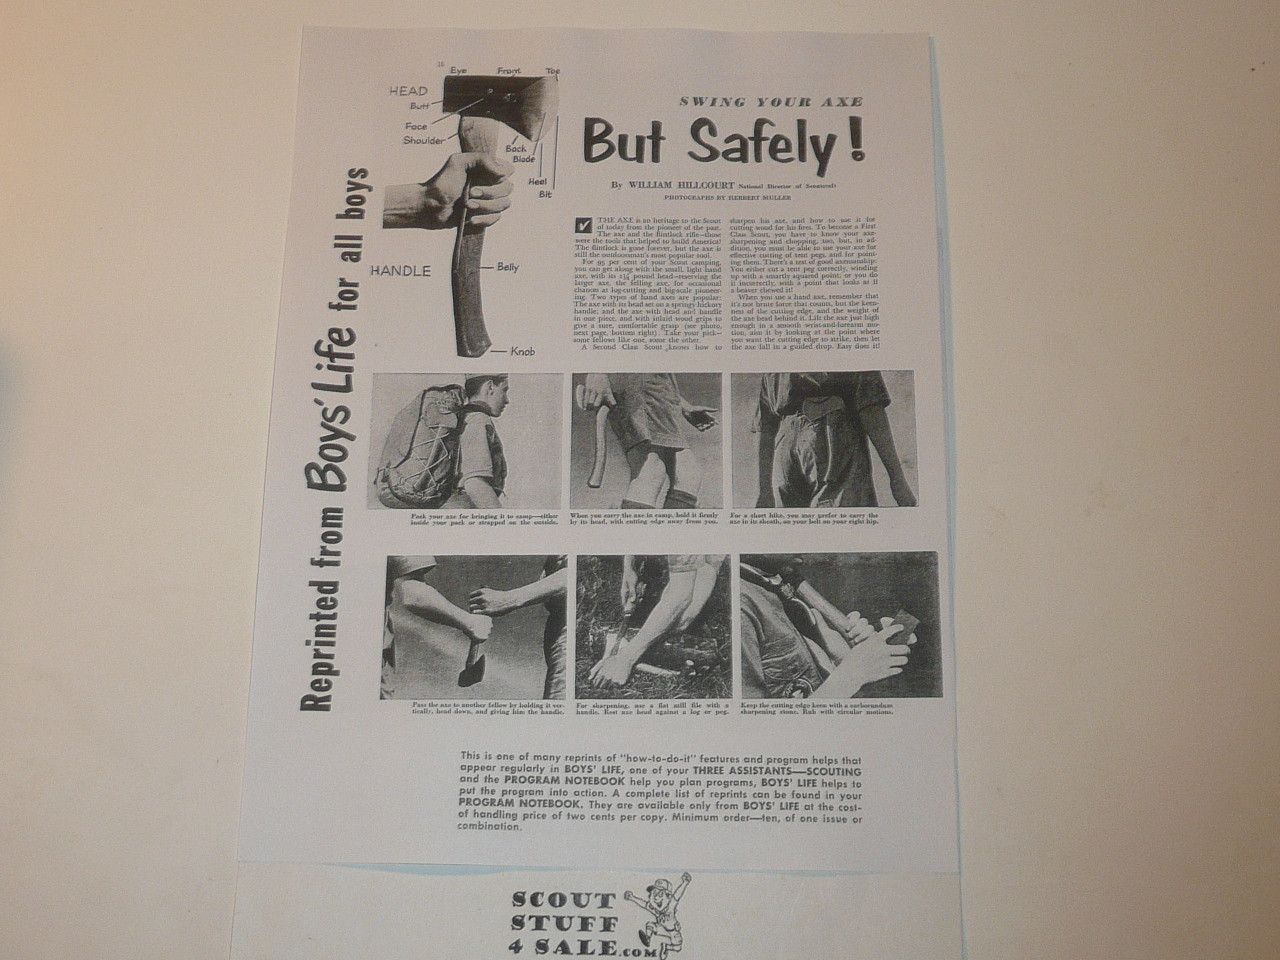 Swing Your Axe But Safely, By Green Bar Bill, Boys' Life Single Topic Reprint from the 1950's - 1960's , written for Scouts, great teaching materials